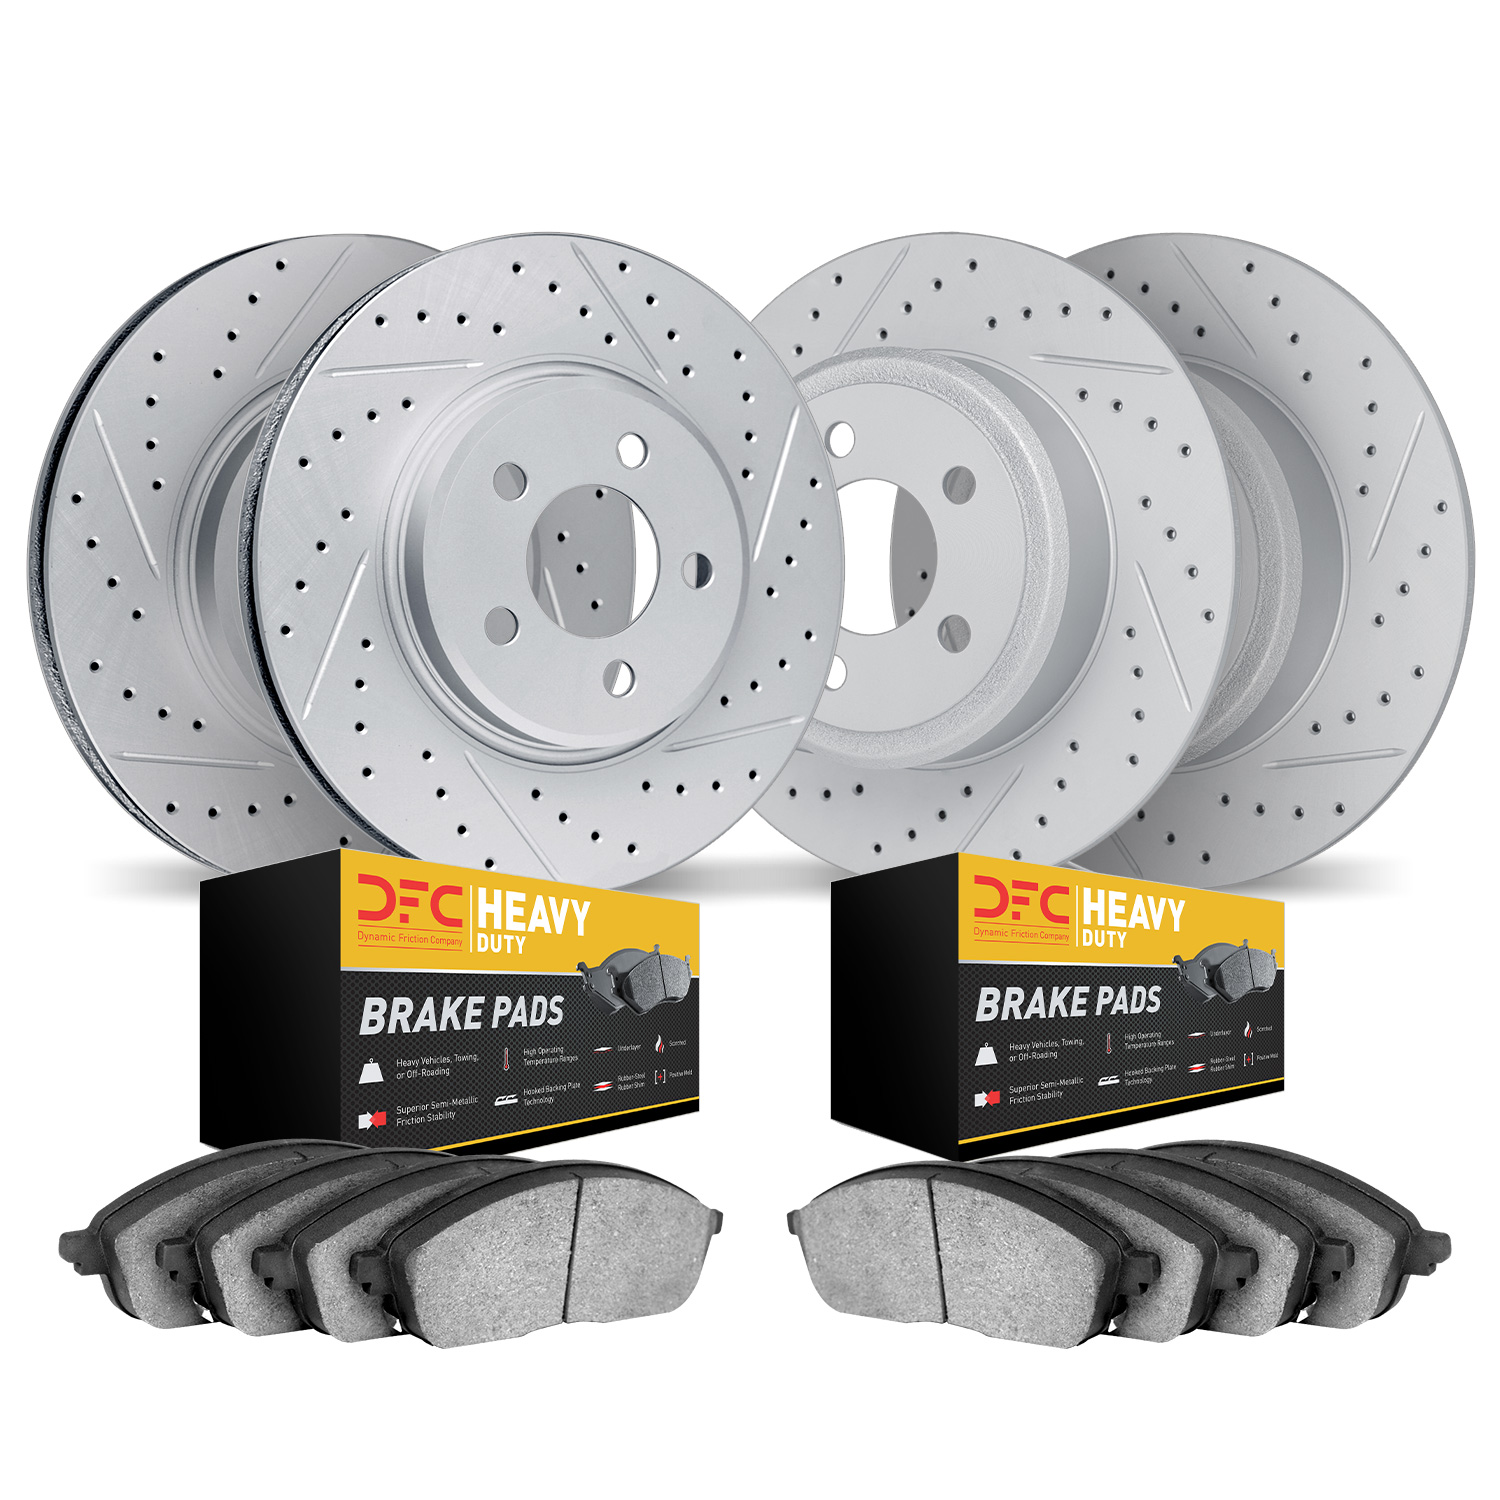 2204-42027 Geoperformance Drilled/Slotted Rotors w/Heavy-Duty Pads Kit, 1993-1998 Mopar, Position: Front and Rear